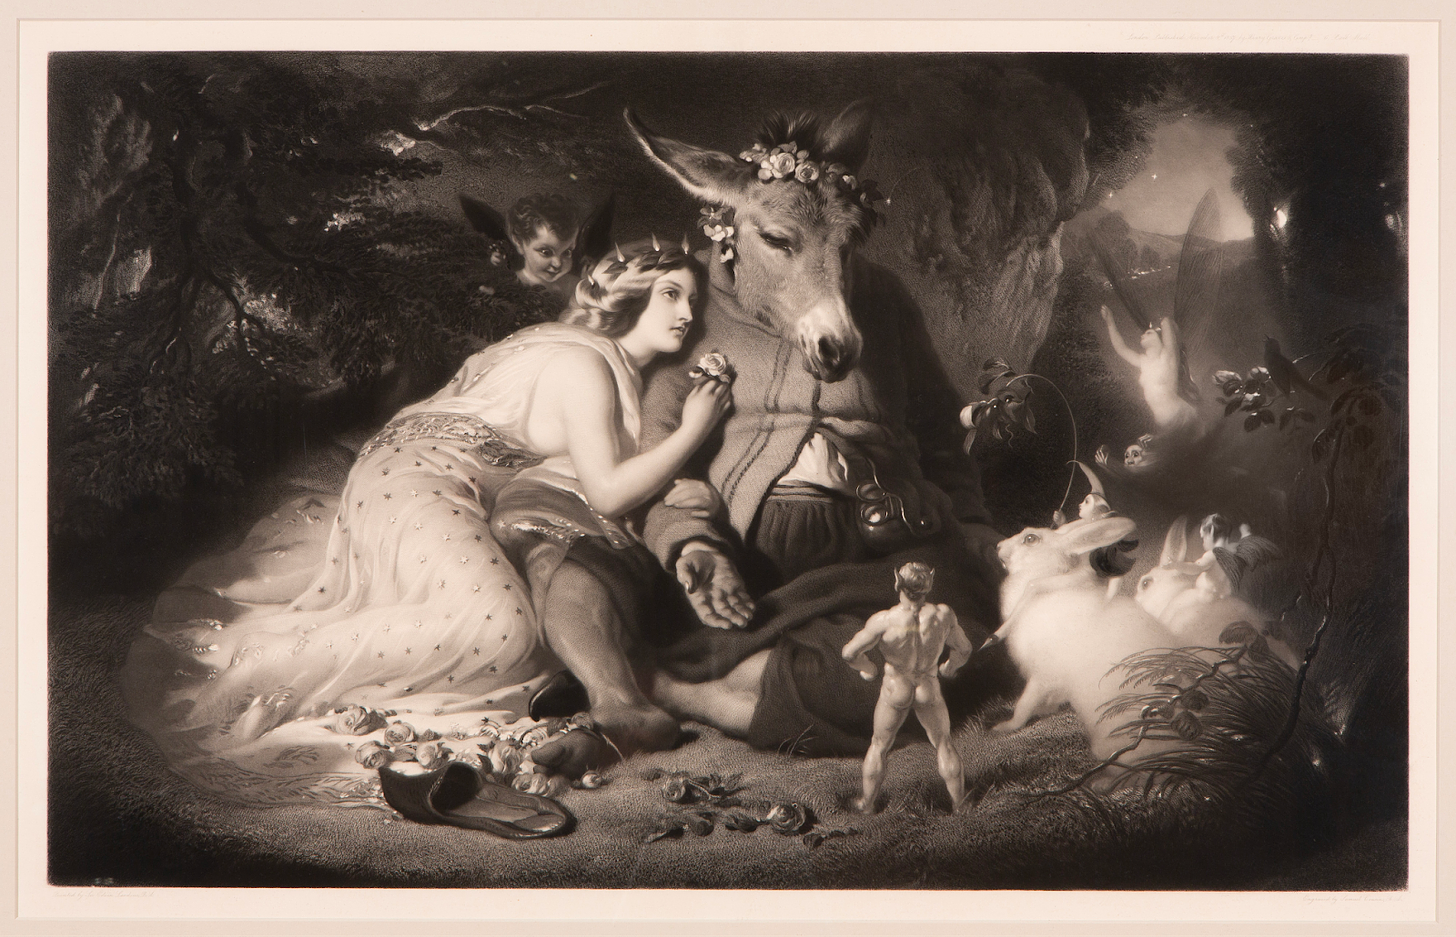 Picture of Titania and Bottom from Midsummer Night's Dream